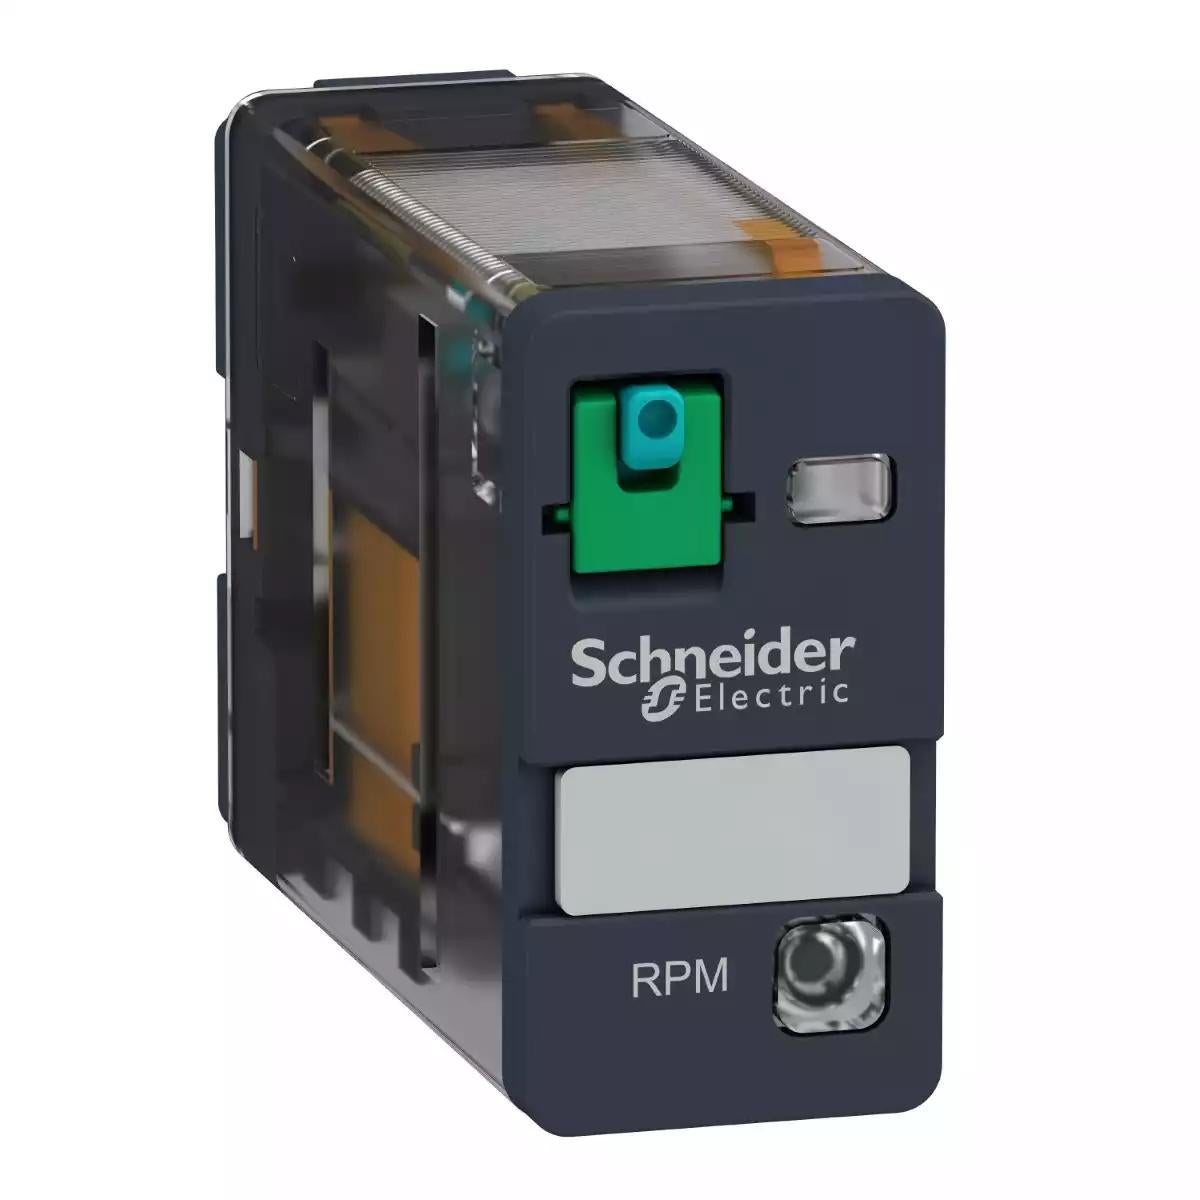 Schneider Electric Zelio RPM - Relay power plug-in relay - 1 C/O - 24 V DC - 15 A - with LED